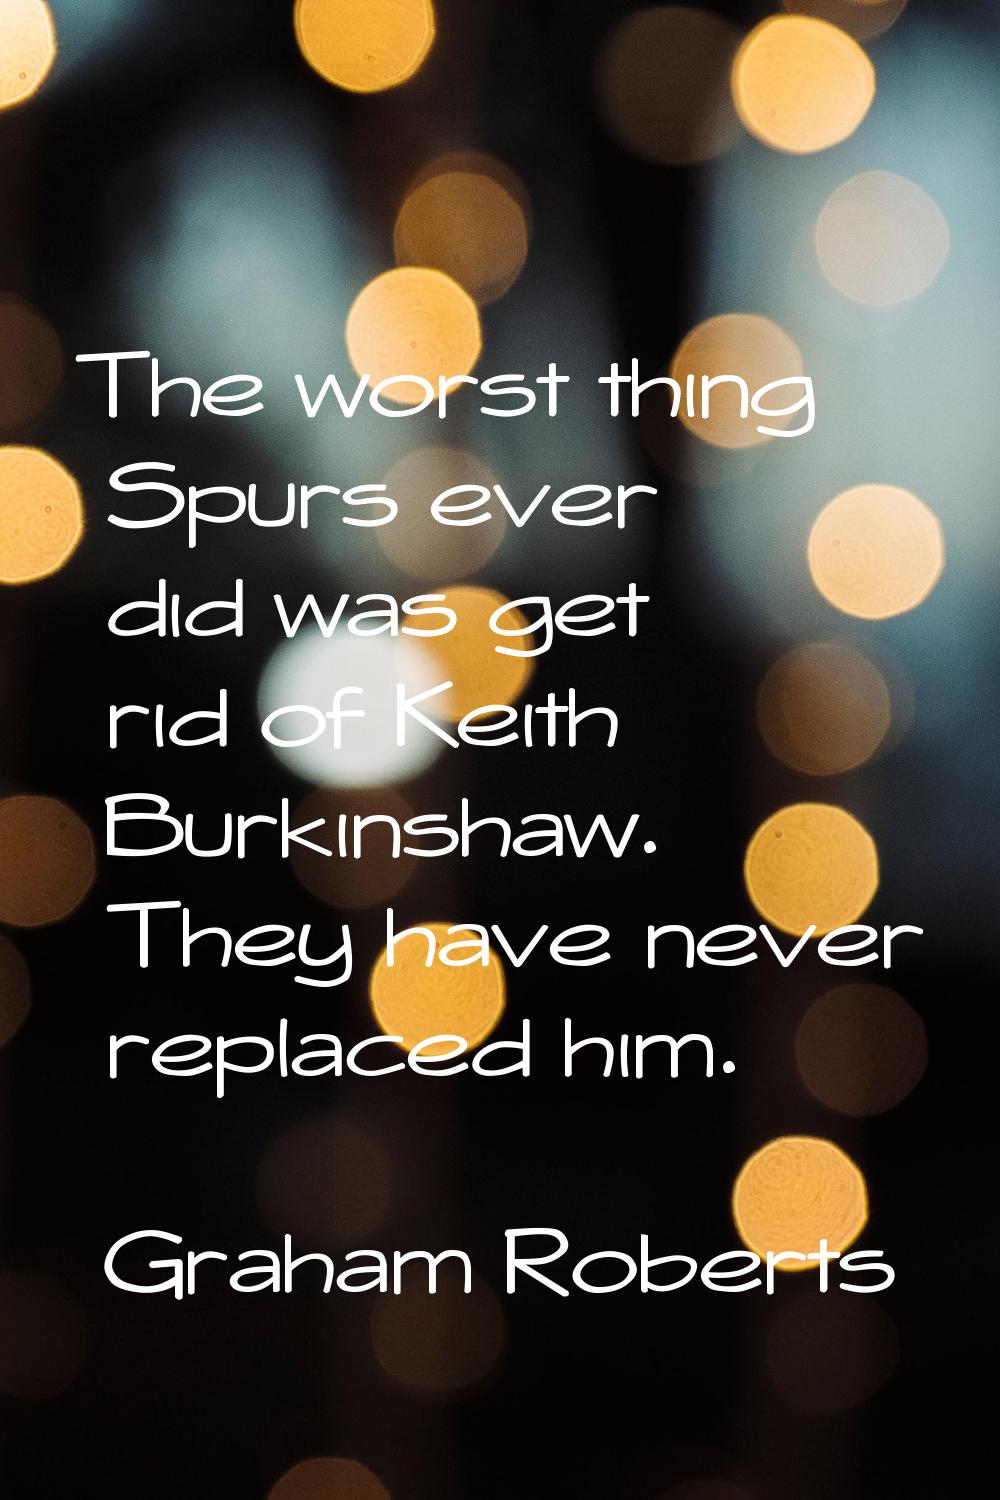 The worst thing Spurs ever did was get rid of Keith Burkinshaw. They have never replaced him.